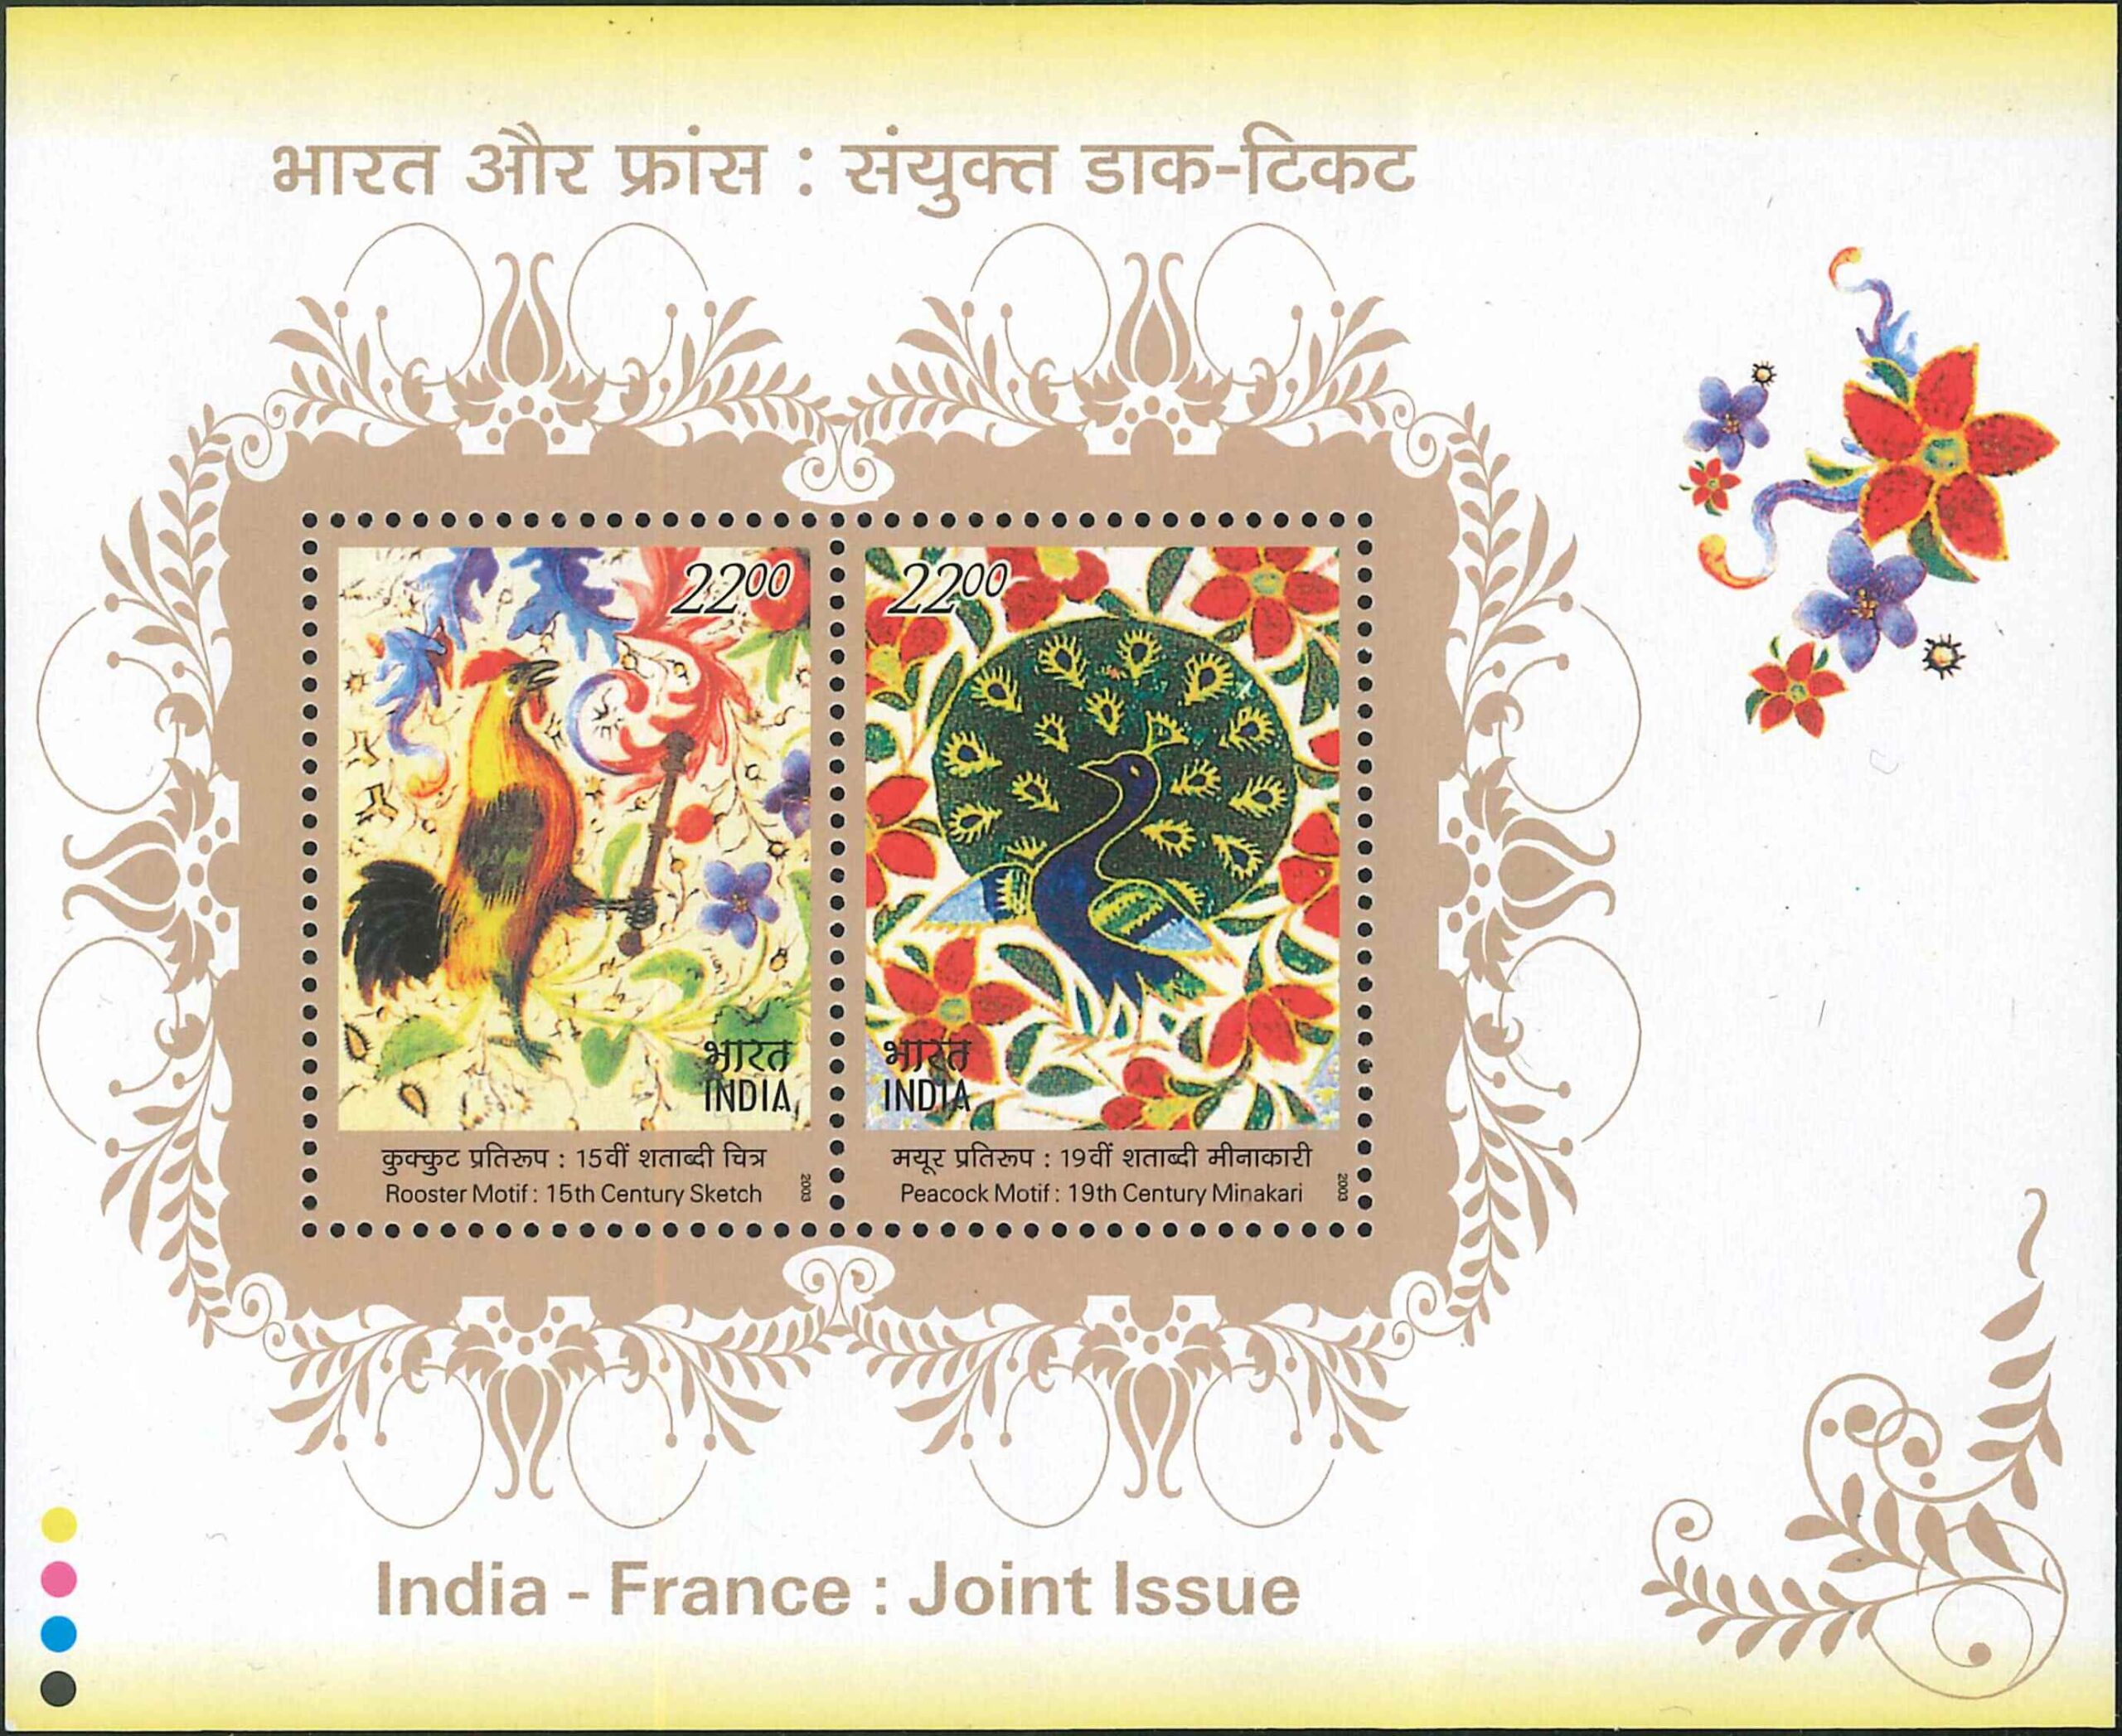  India-France : Joint Issue 2003